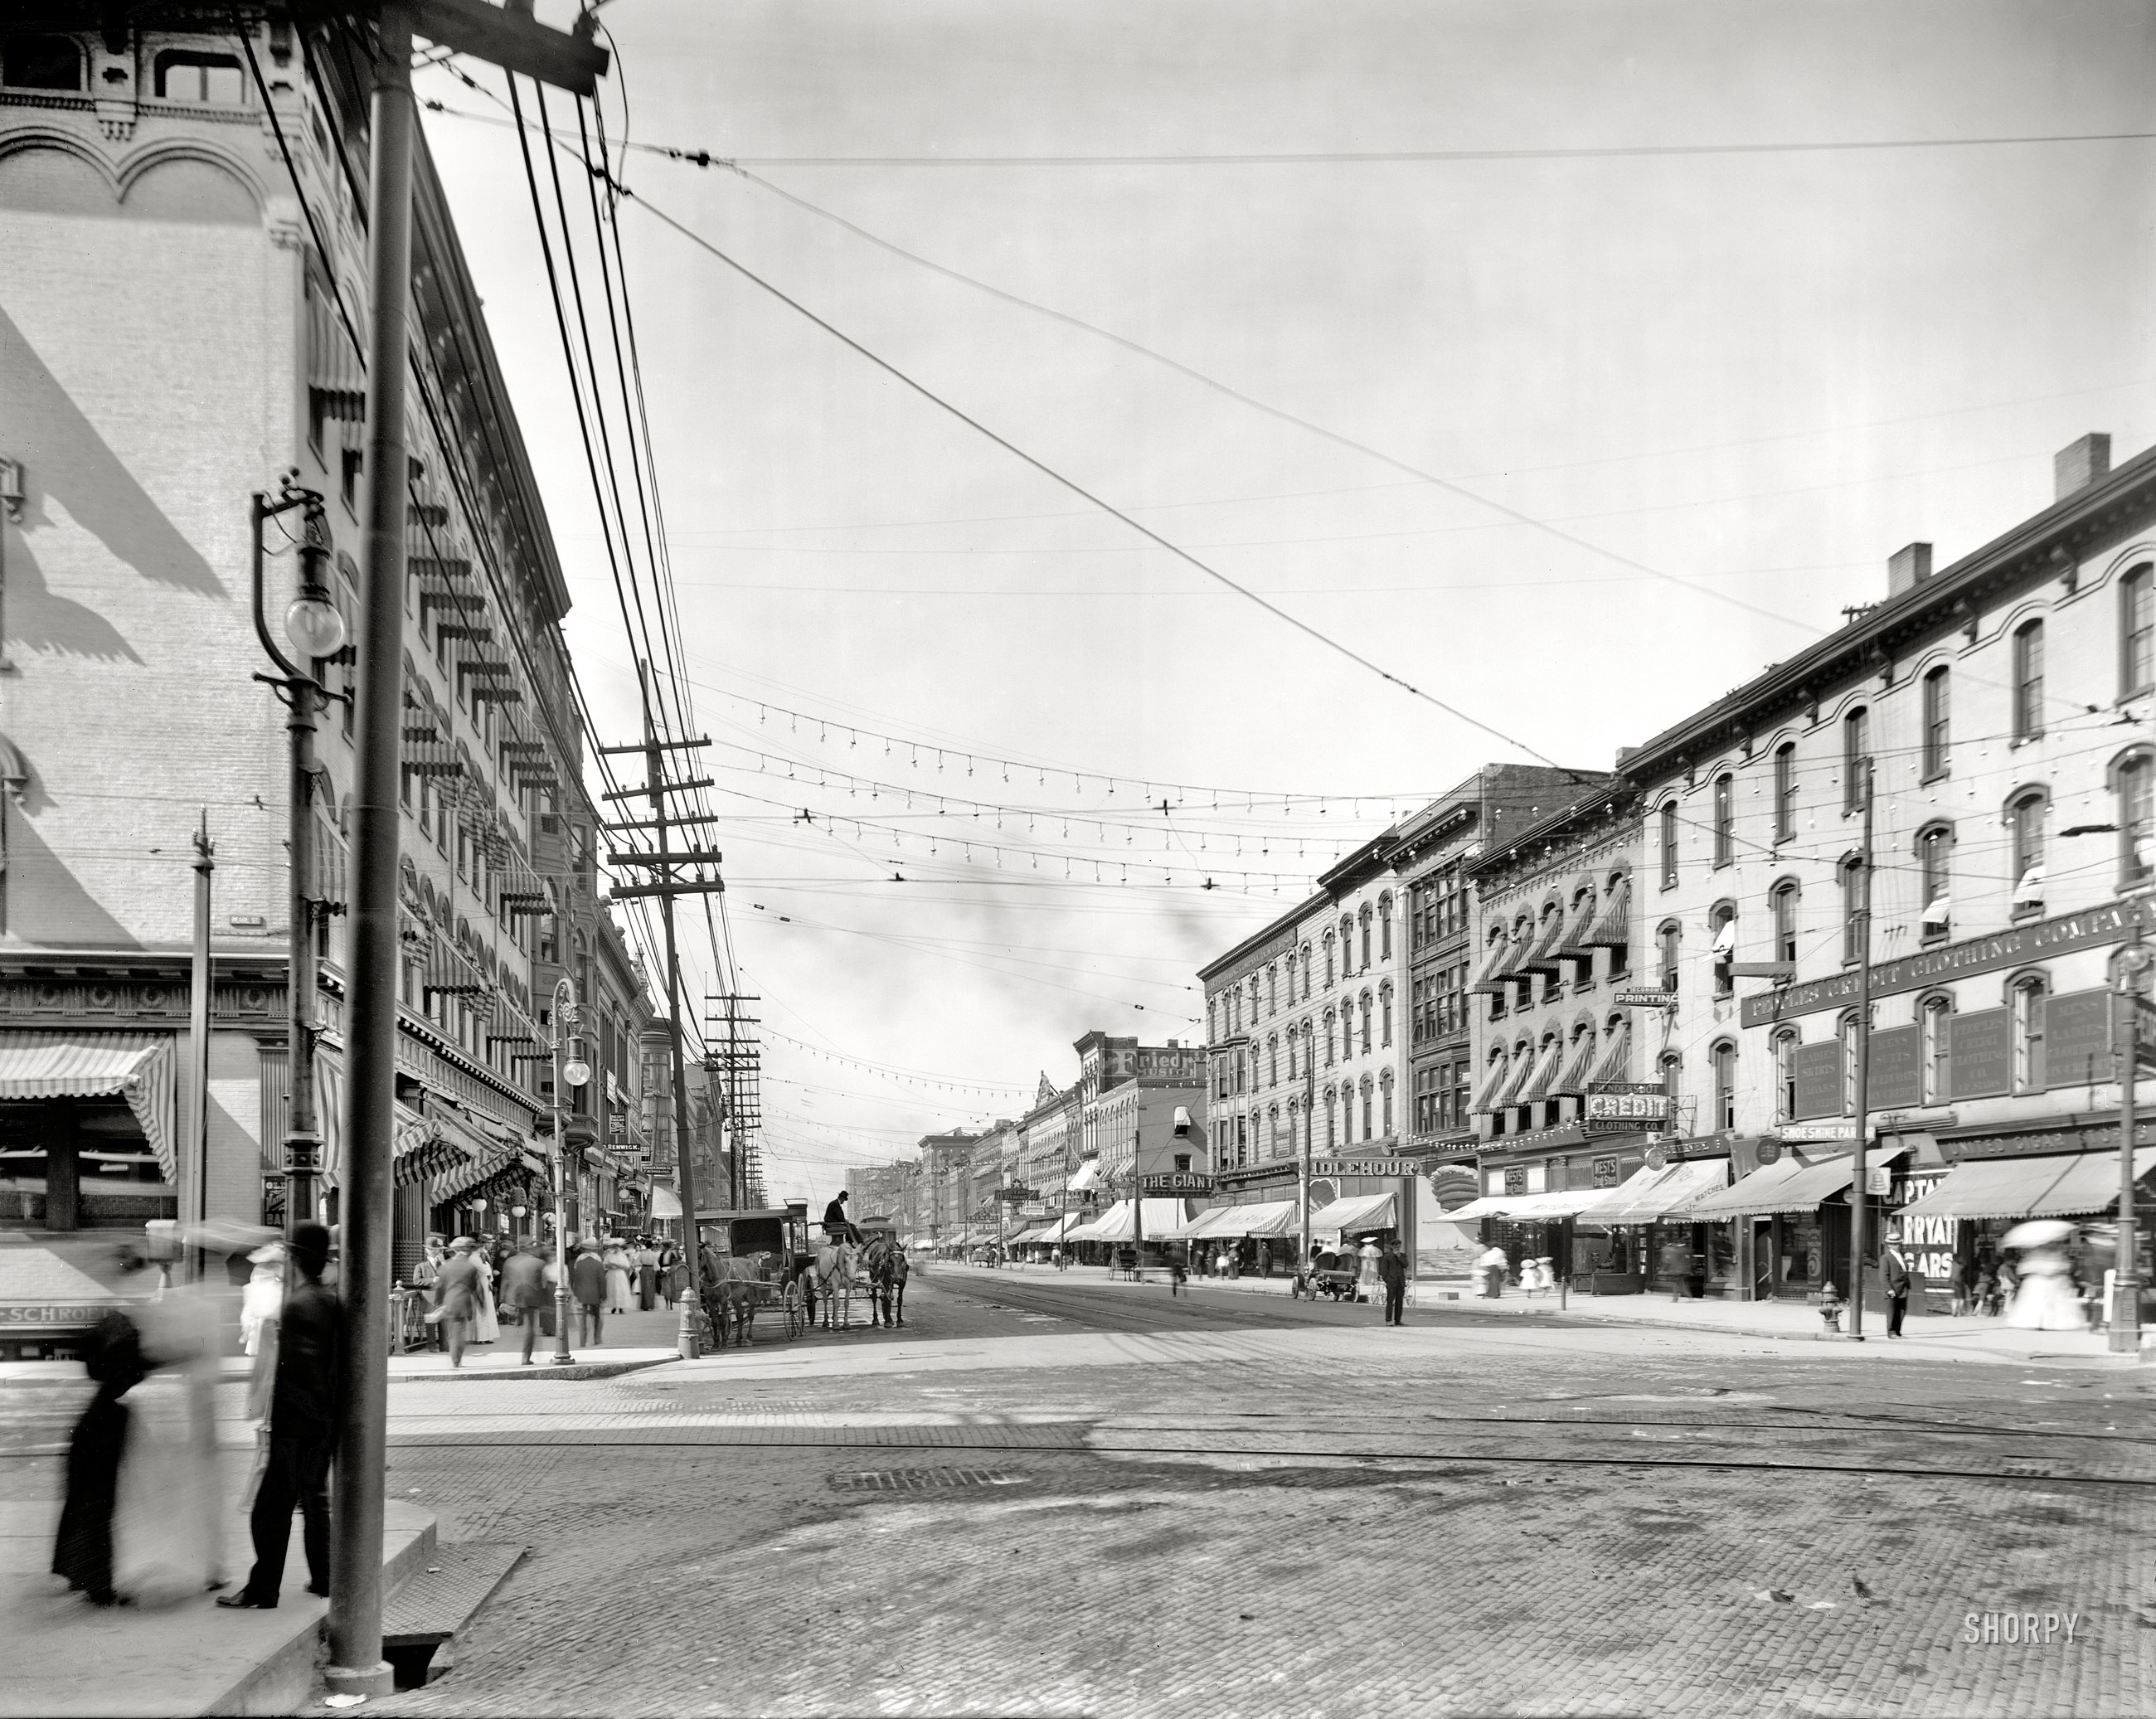 Grand Rapids, Michigan, circa 1908. "Canal Street from corner of Monroe." Merchants vying for your trade include The Giant, Idlehour and People's Credit Clothing Co. 8x10 glass negative, Detroit Publishing Company. View full size.